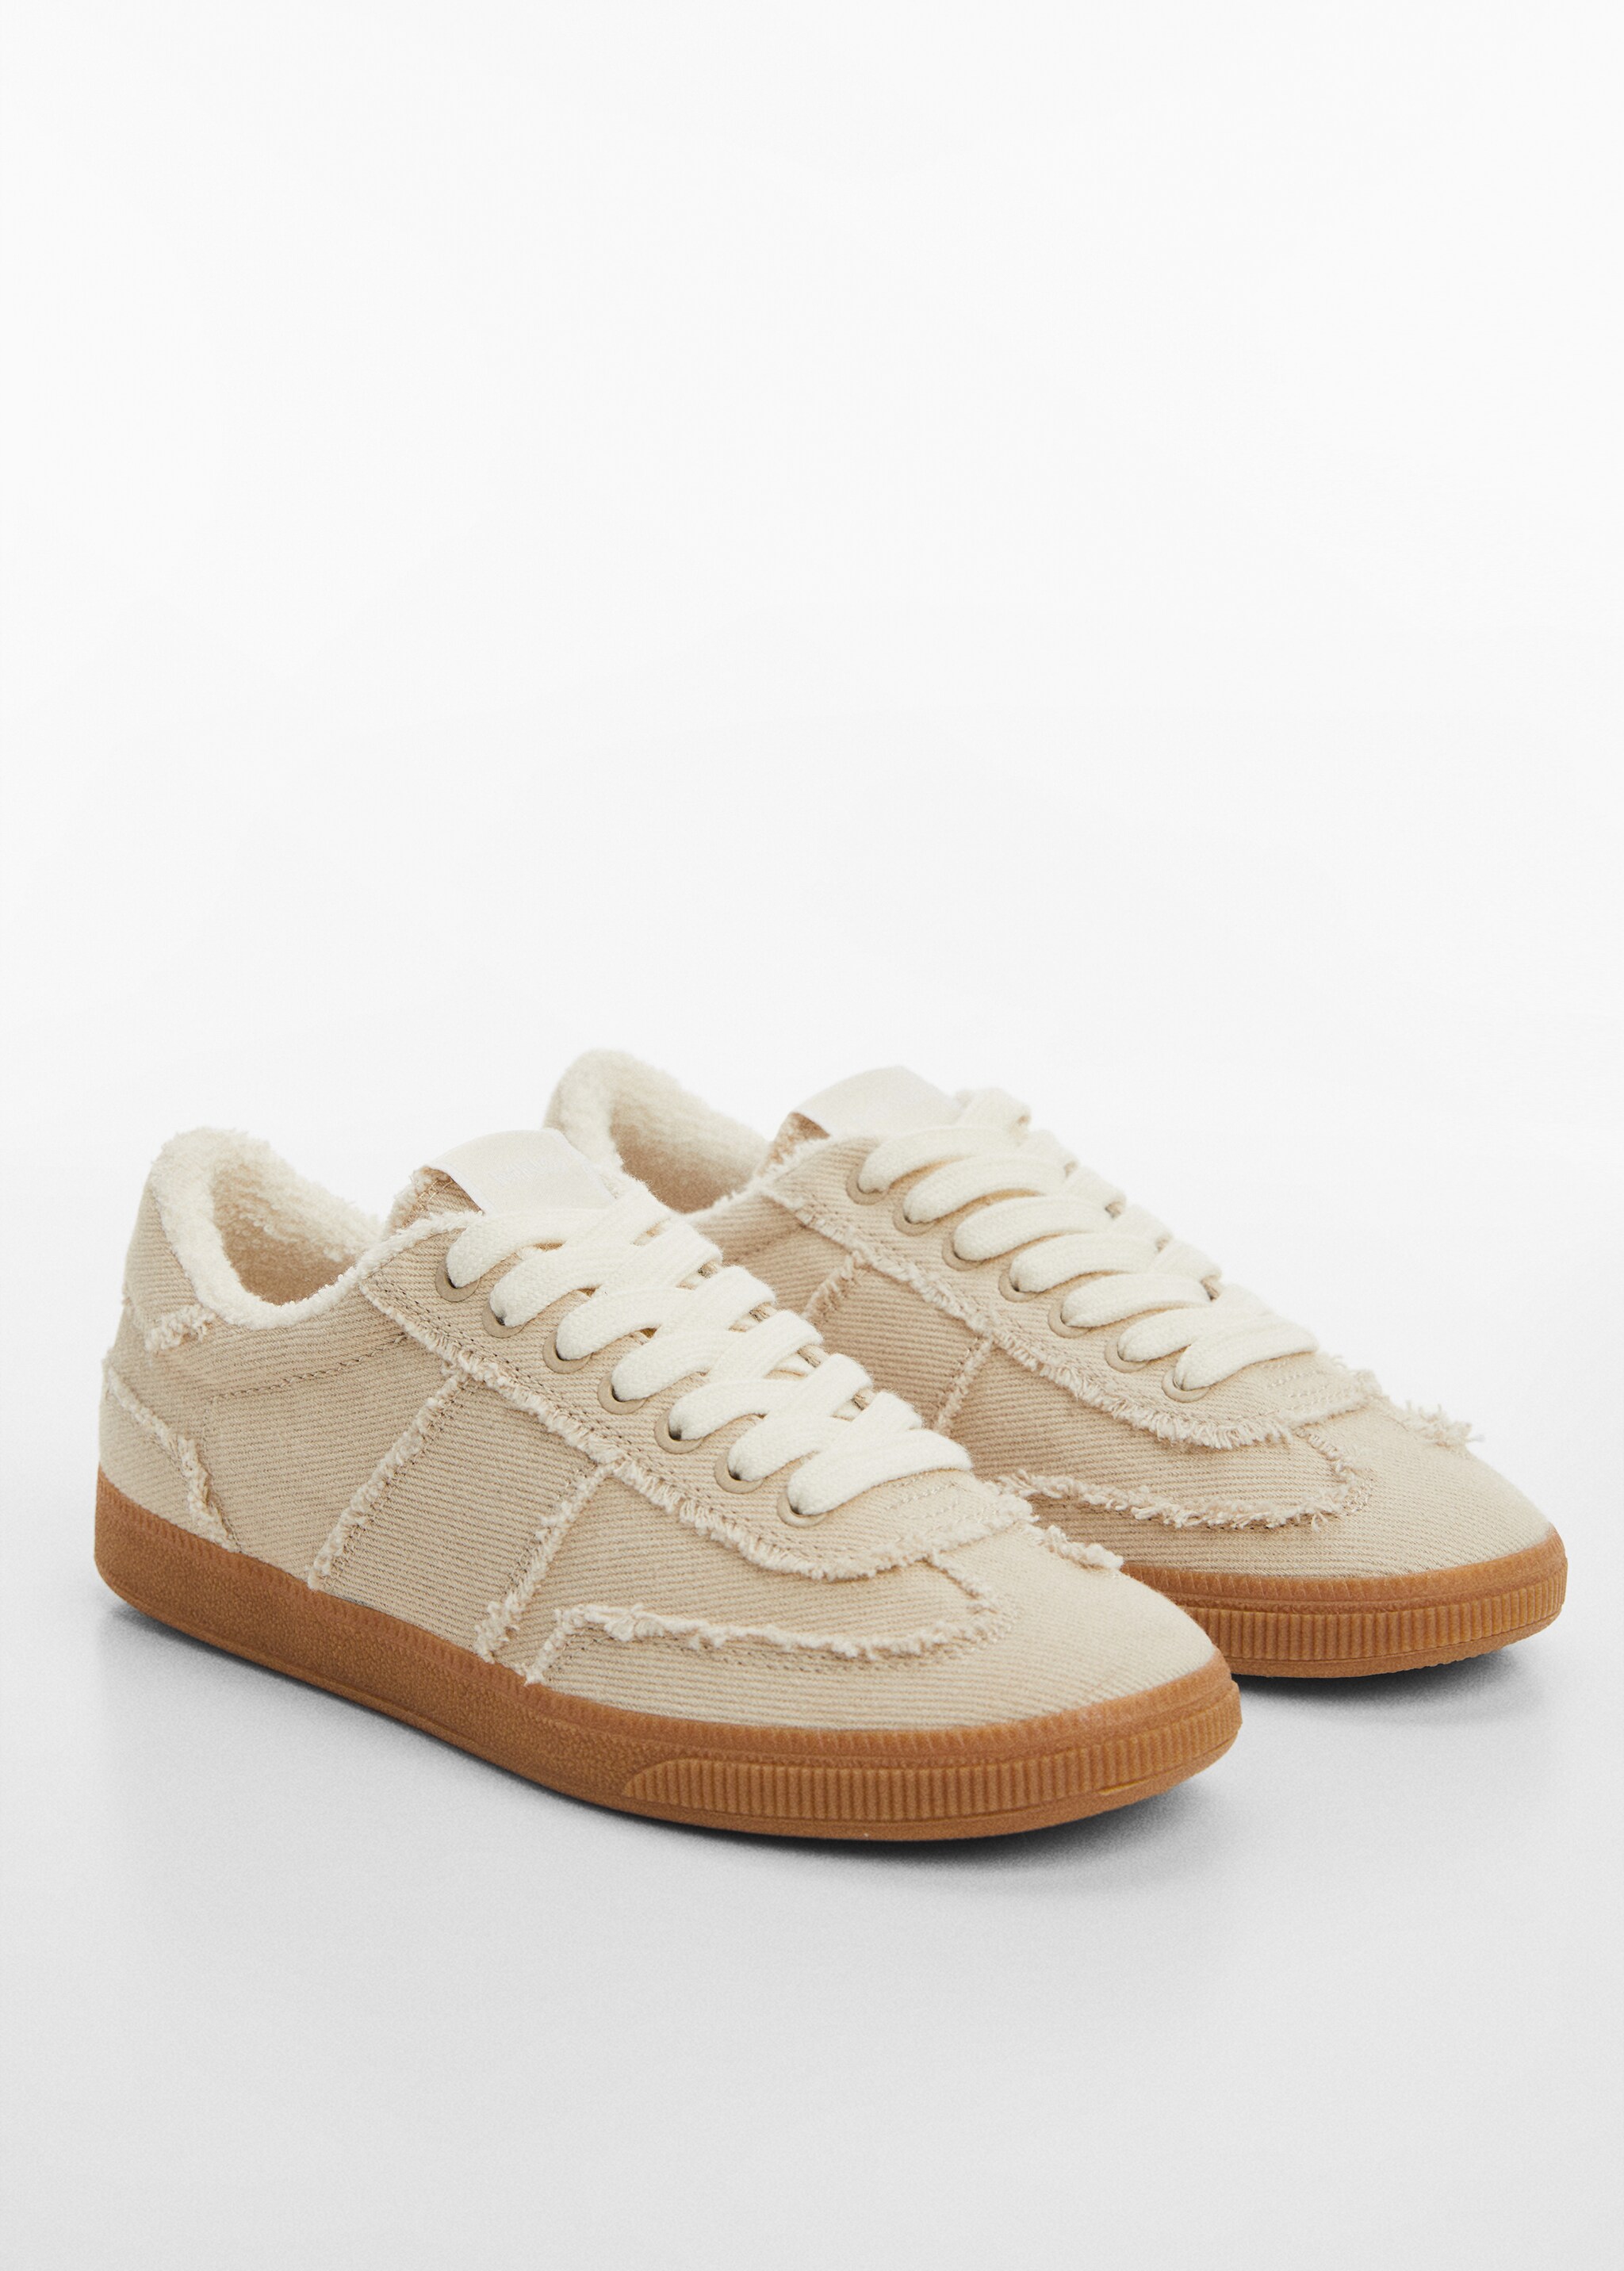 Trainers with frayed details - Medium plane